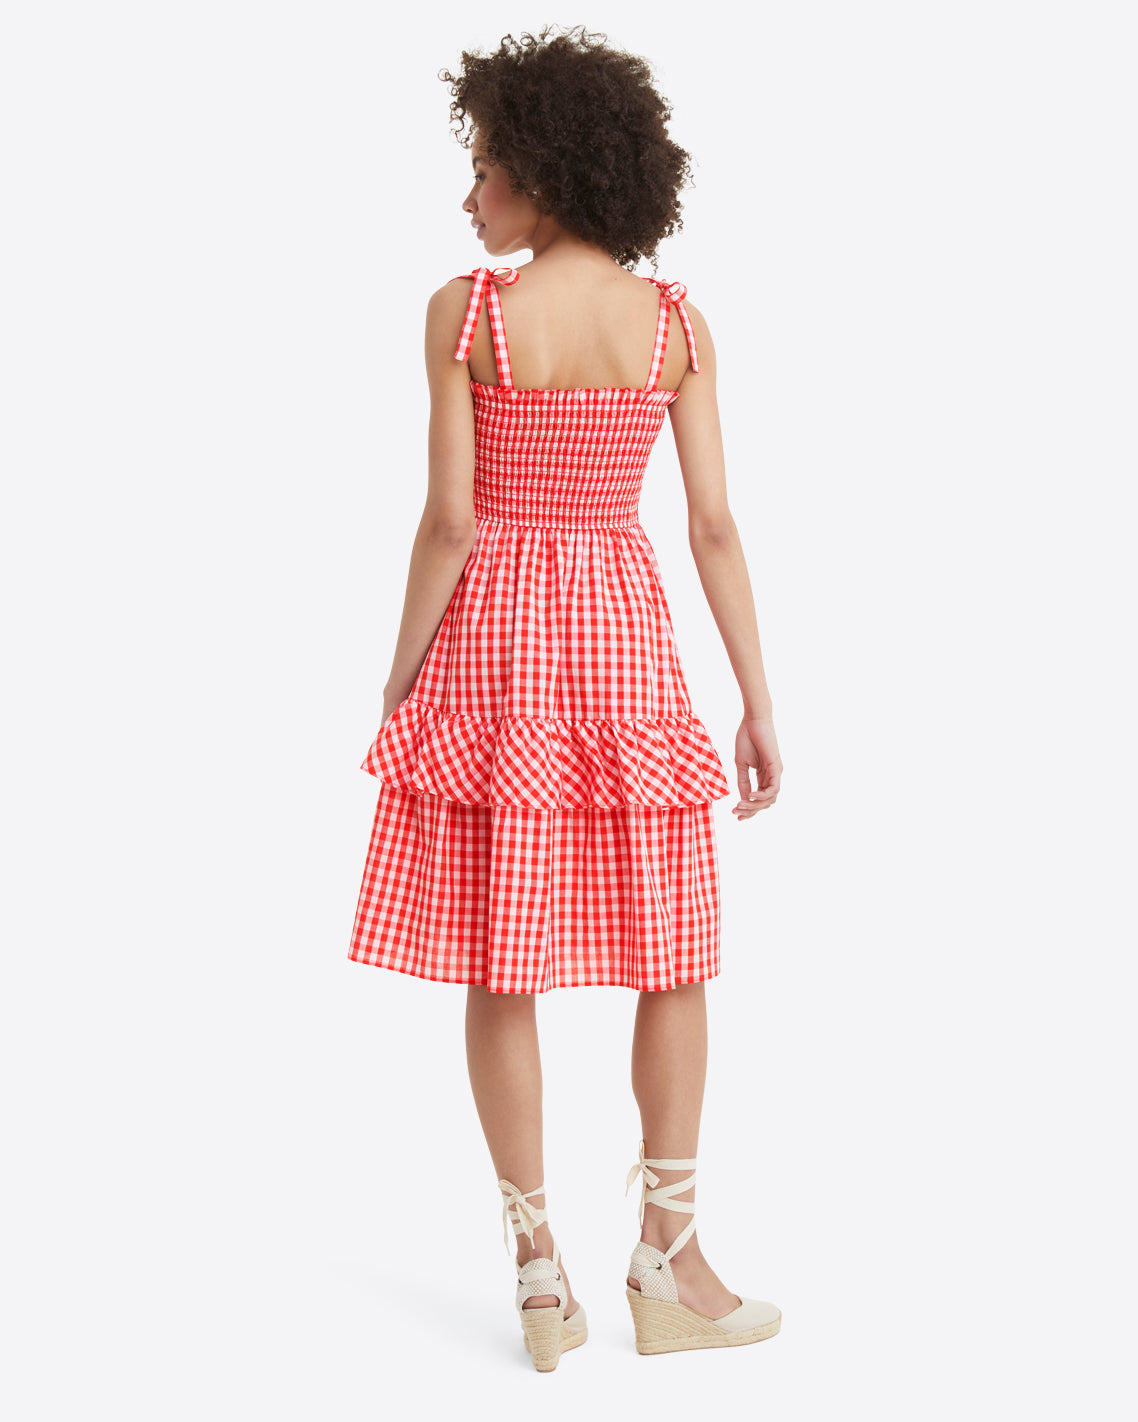 Taylor Dress in Poppy Red Gingham